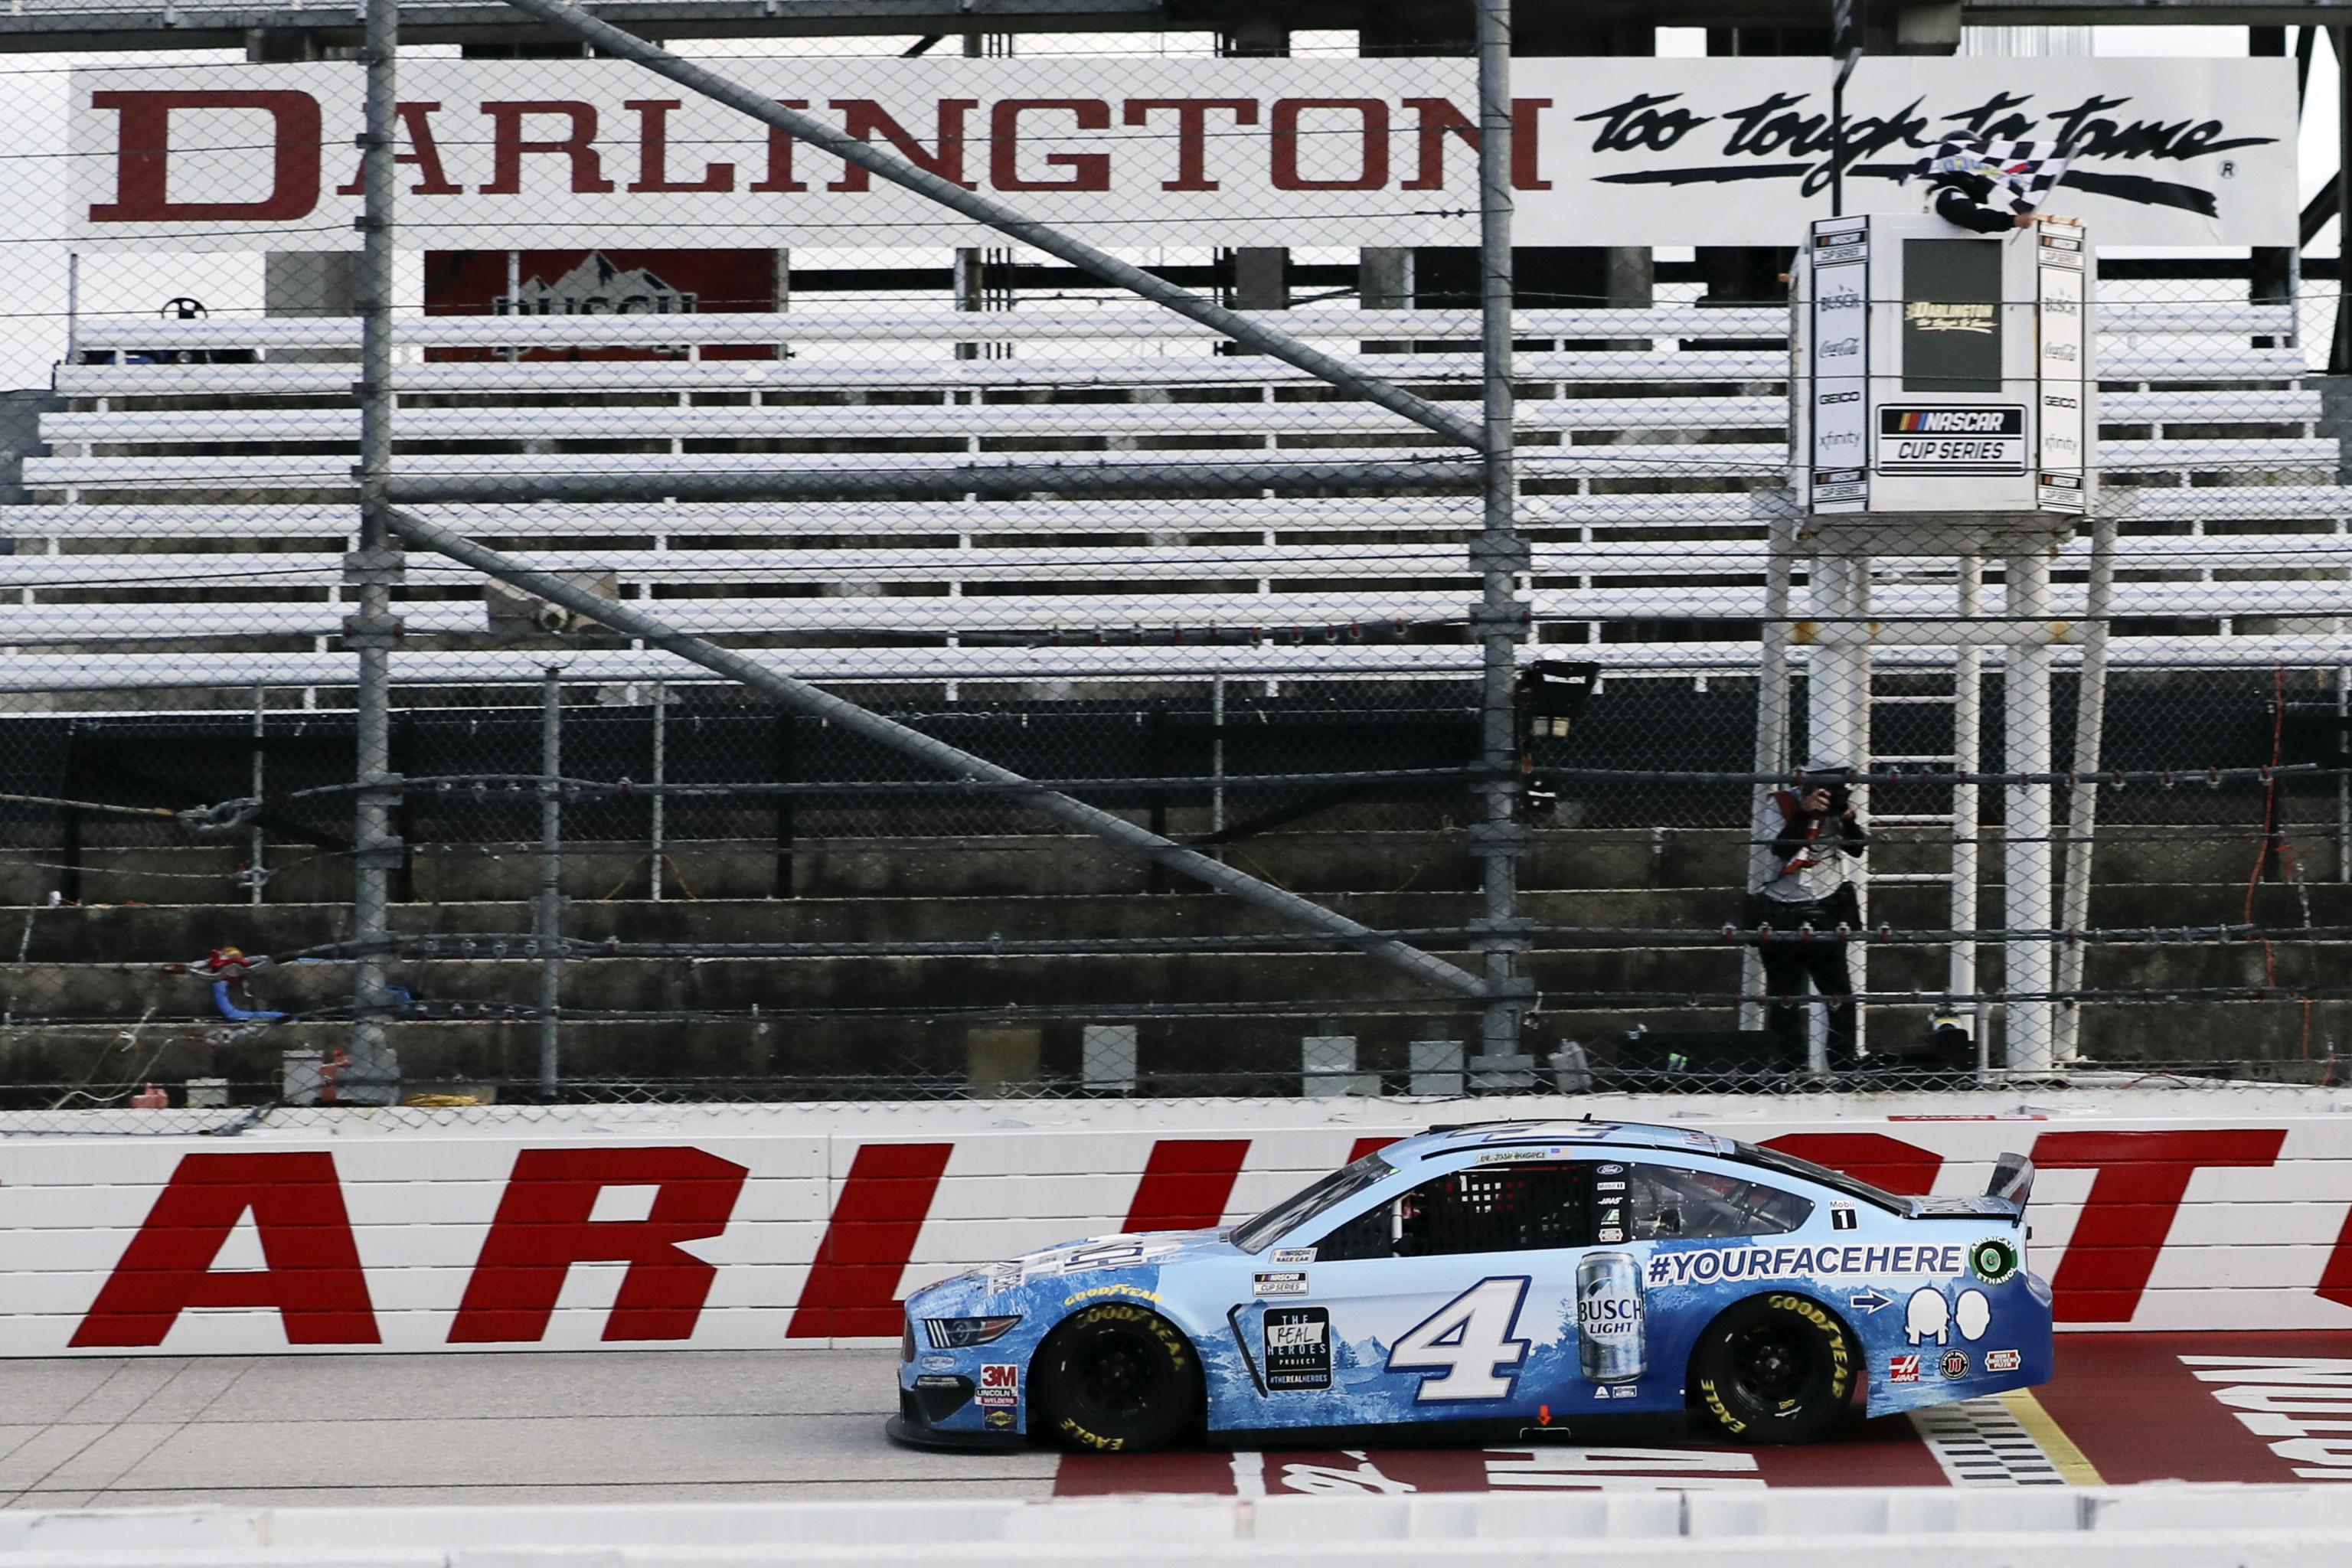 NASCAR at Darlington 2020 Odds, TV Schedule, Live Stream and Drivers